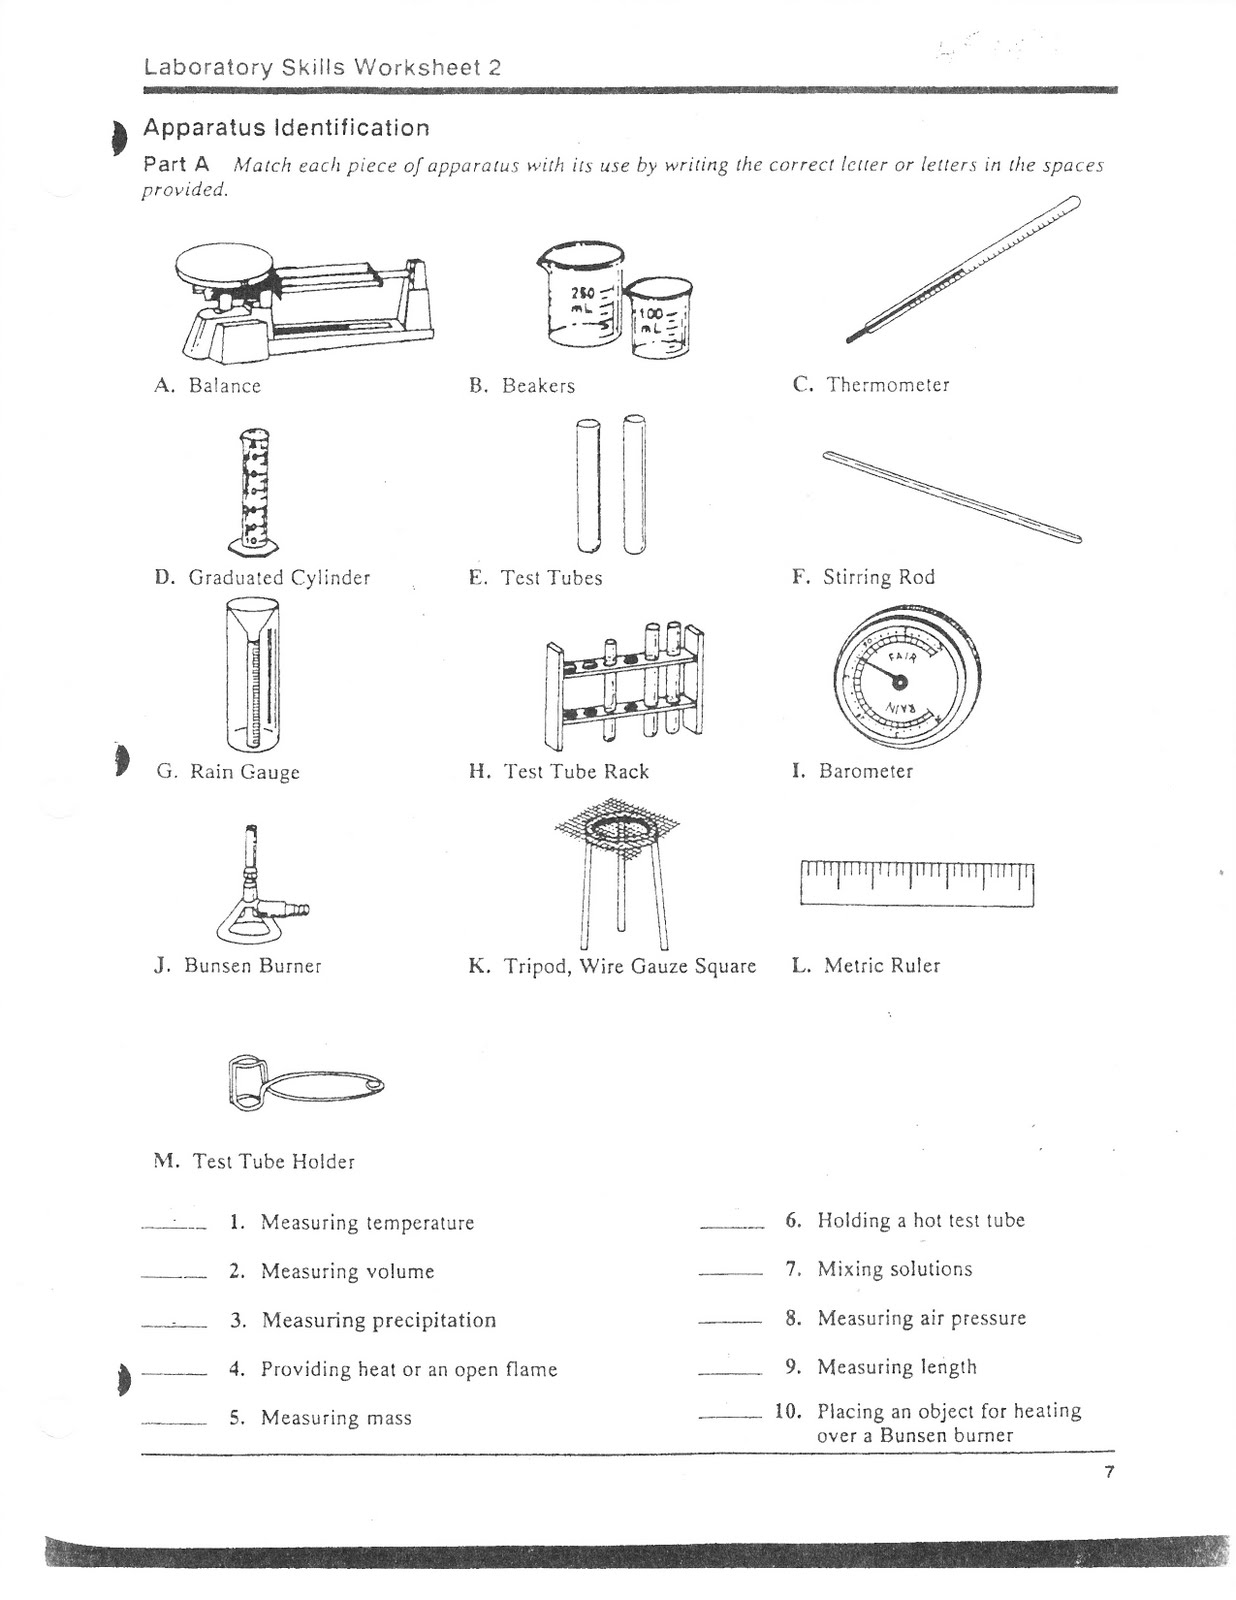 11-best-images-of-lab-equipment-worksheet-answers-science-lab-equipment-worksheet-science-lab